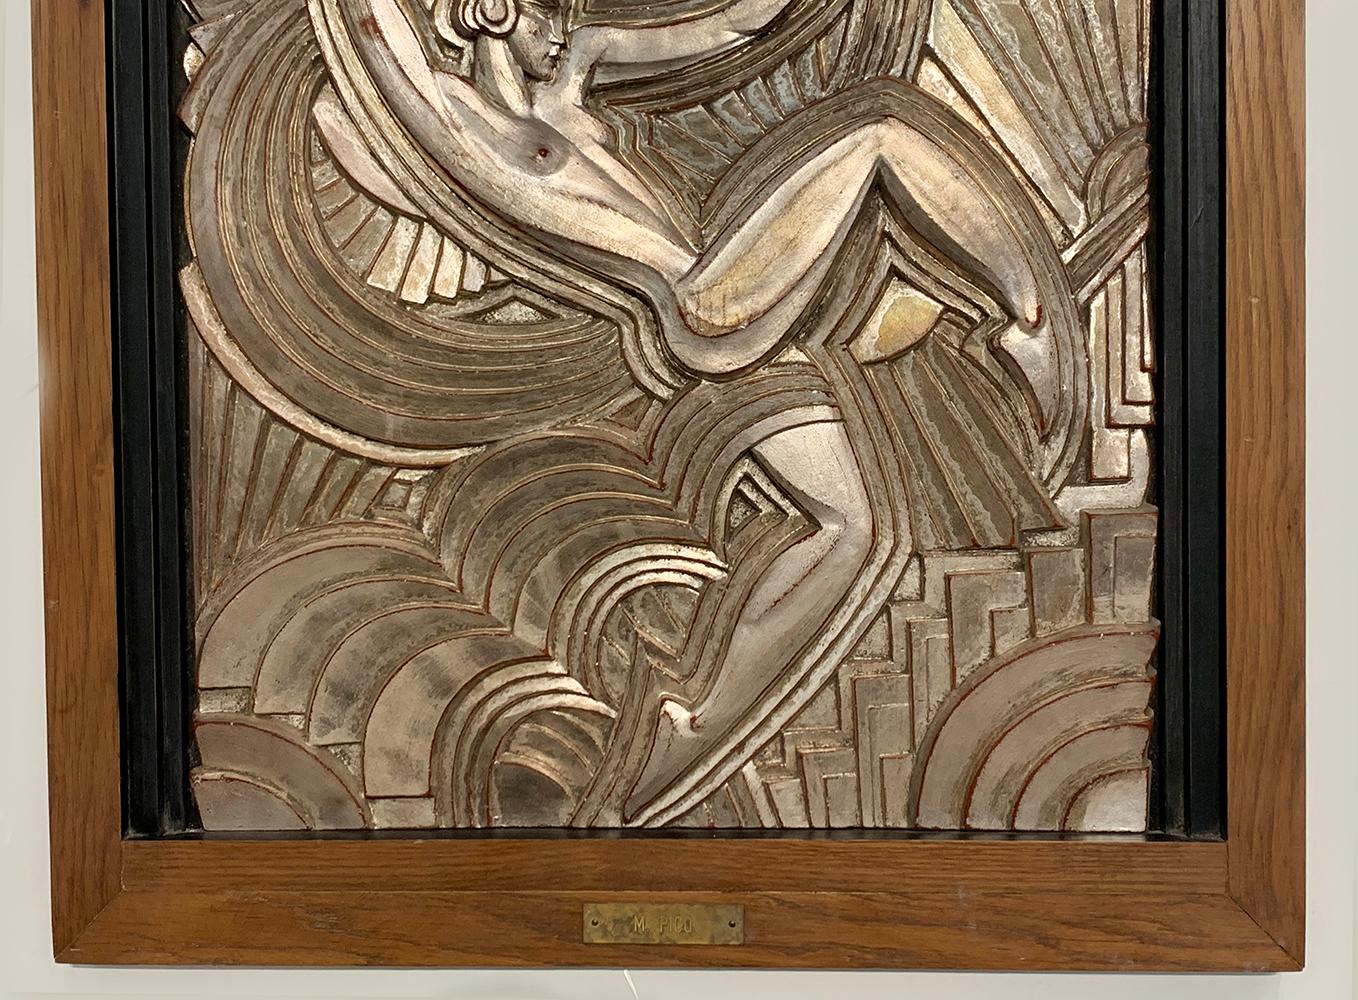 A gilt wood panel designed by Maurice Picaud for the “Folies Bergères” circa 1925.
Entitled “Serpentine Dancer” in light gilt color.
Depicting the dancer Nikolska, posed for the sculpture in ebony and natural oak frame.
The panel was made in a